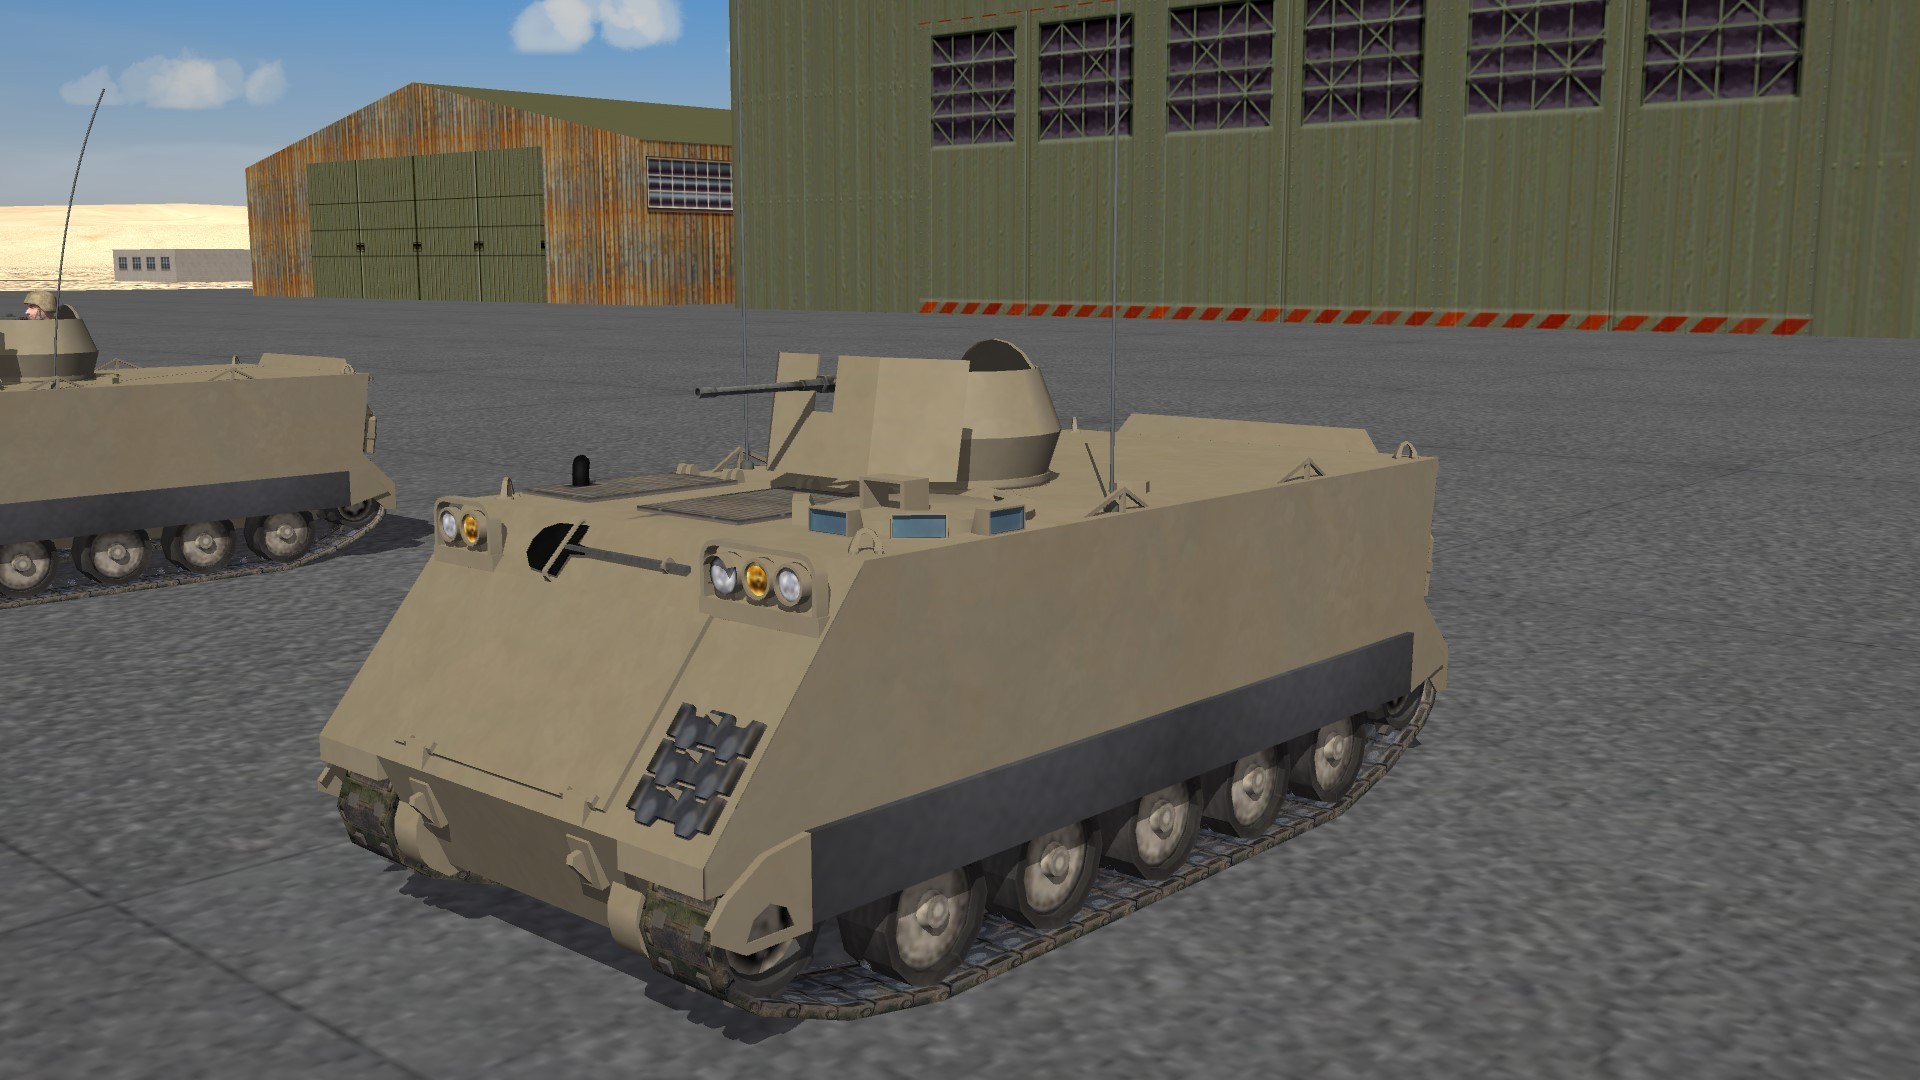 M113 ACAV from 60's to 2000 No crew